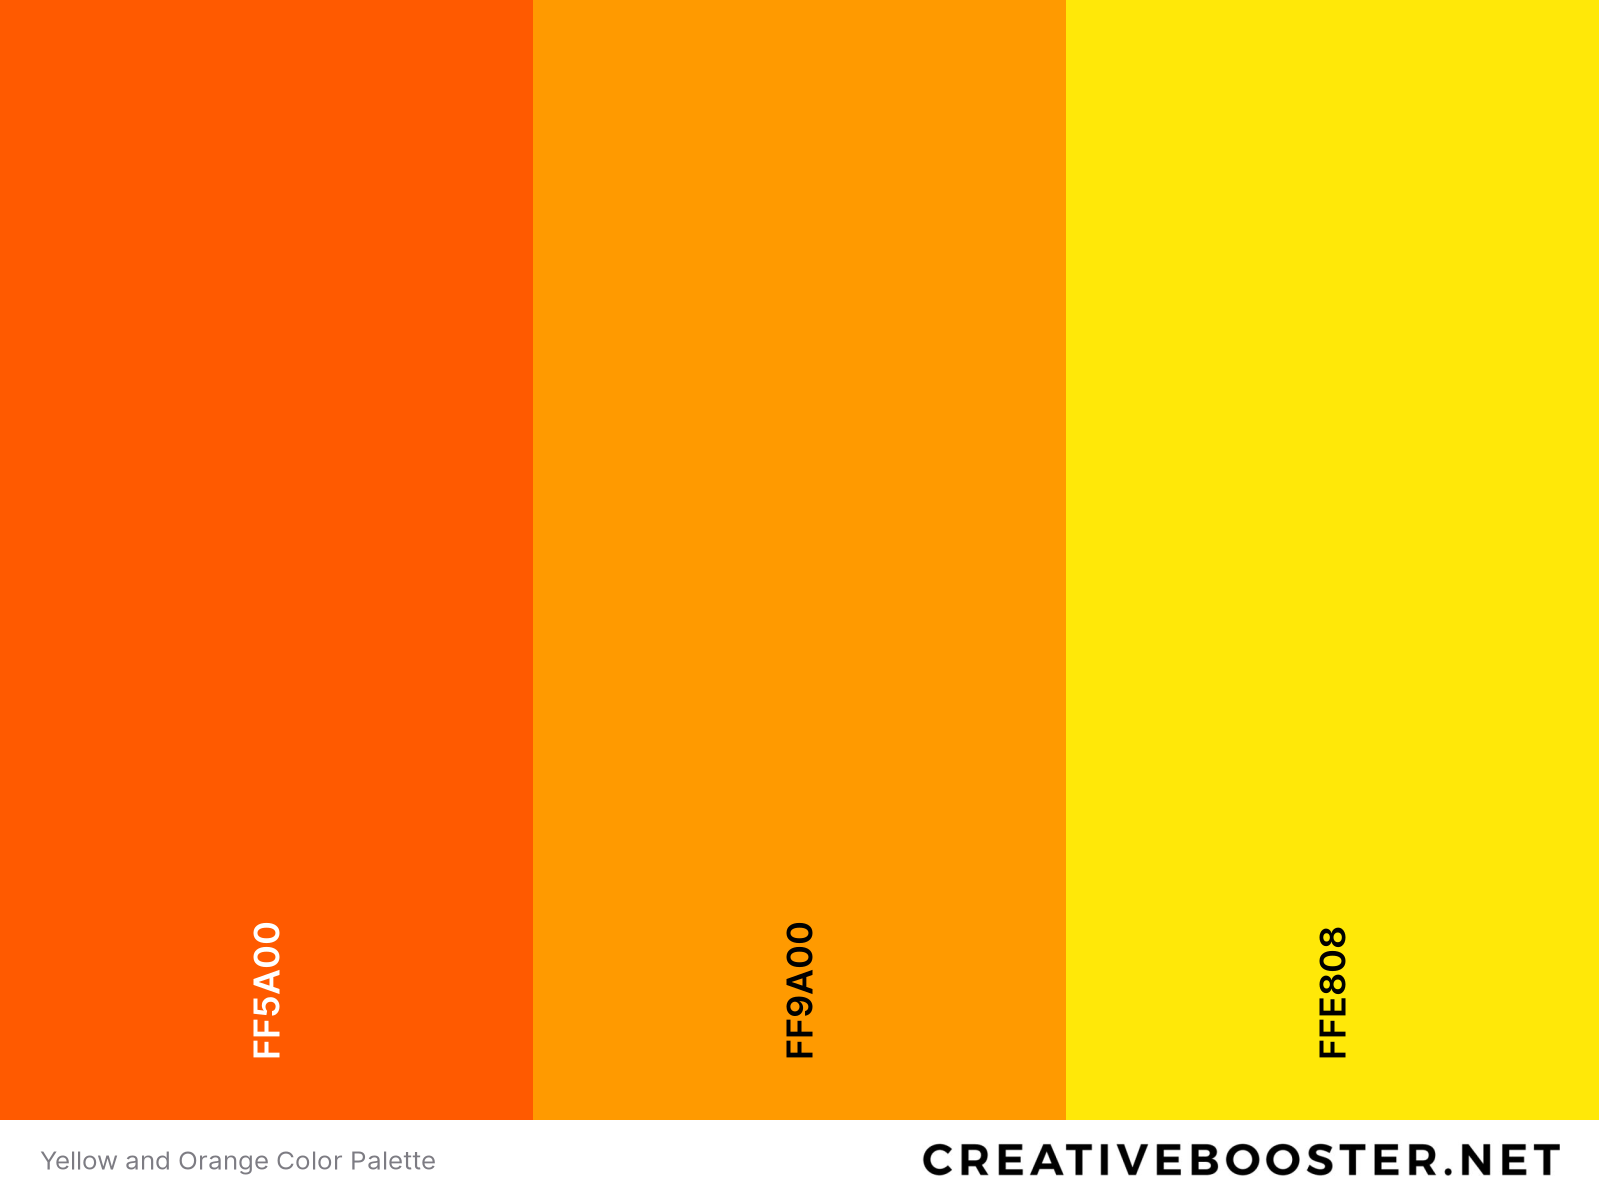 Yellow and Orange Color Palette